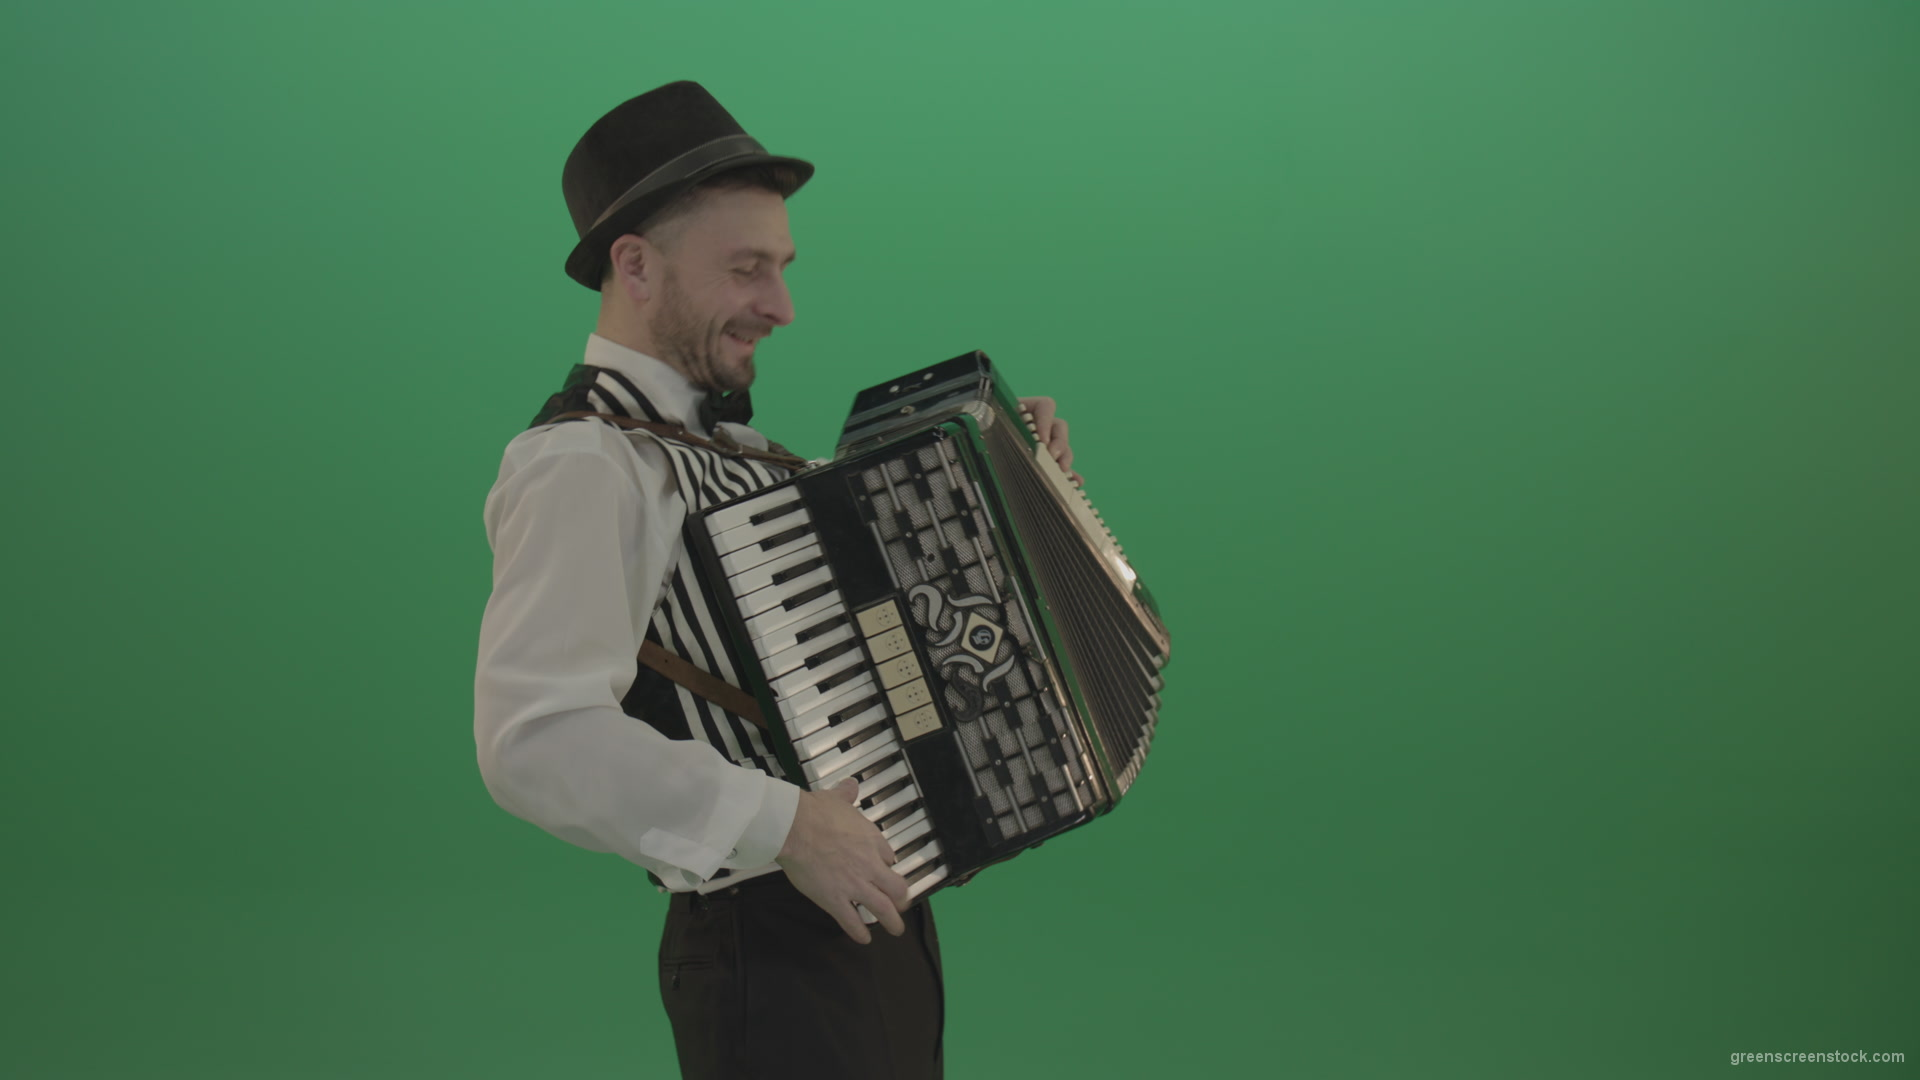 Man-in-hat-playing-Accordion-jazz-music-on-wedding-in-side-view-isolated-on-green-screen_004 Green Screen Stock